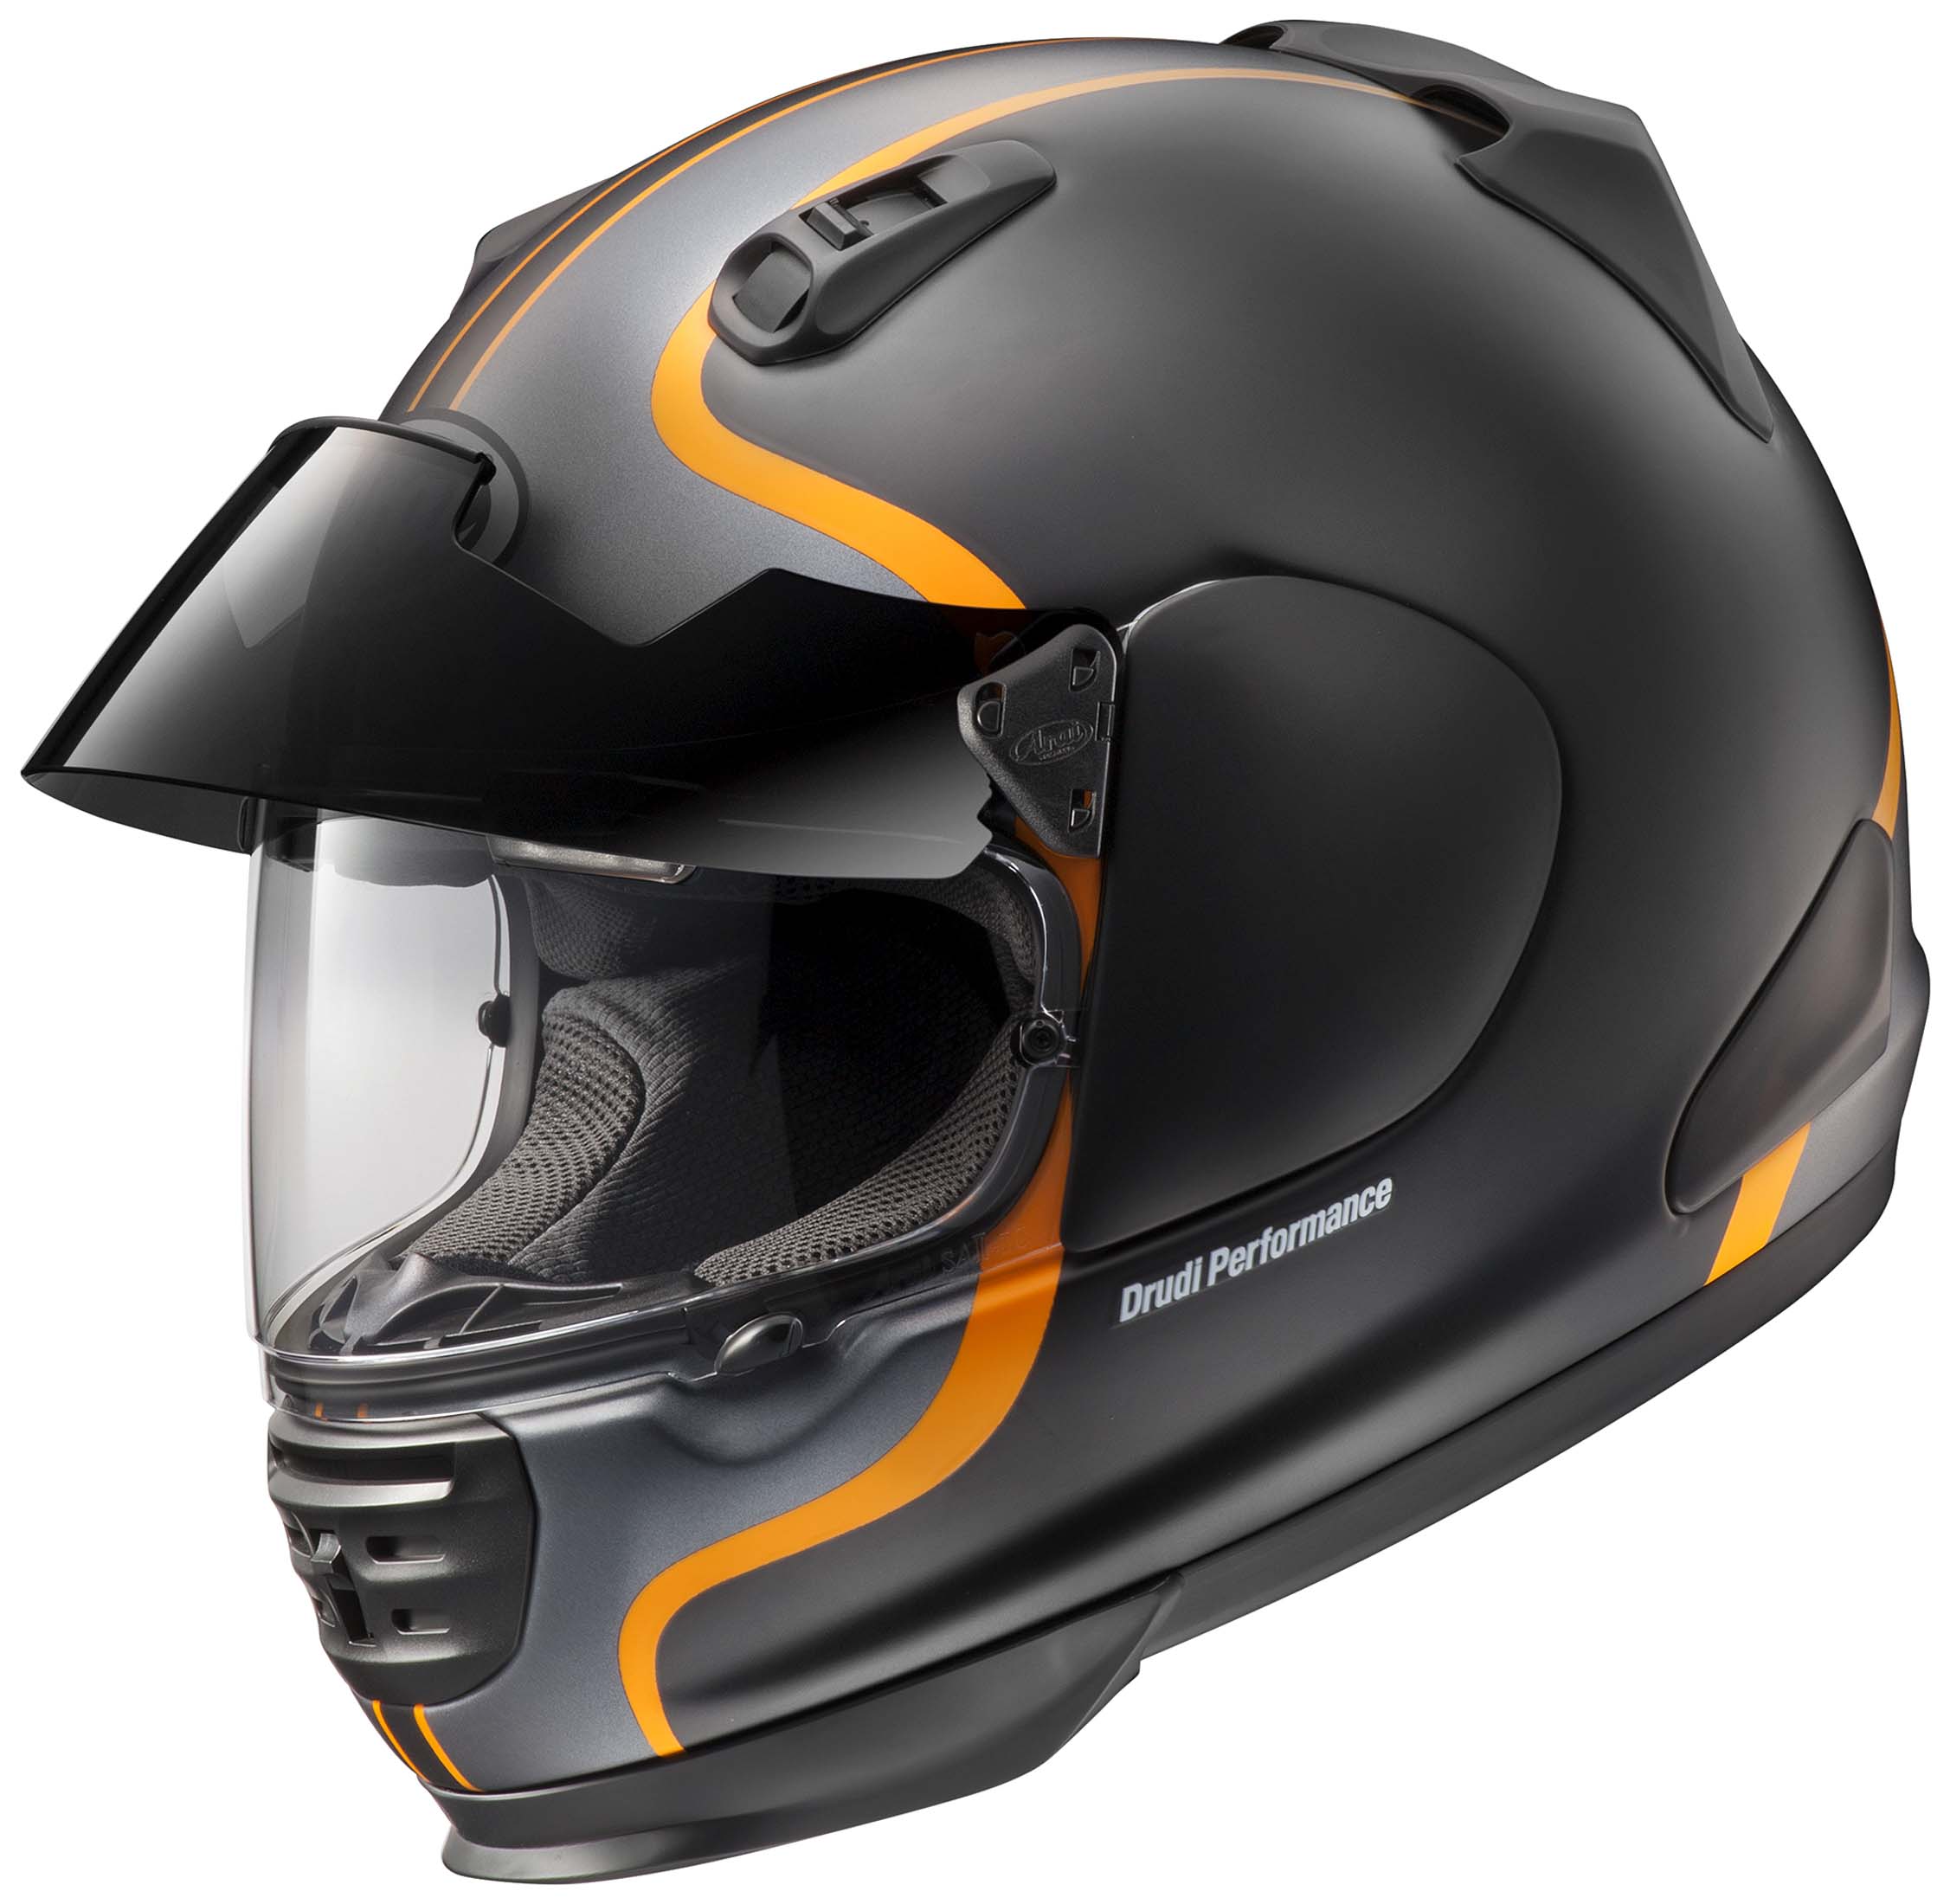 The 13 Best Motorcycle Helmets for Every Type of Rider - Bloomberg